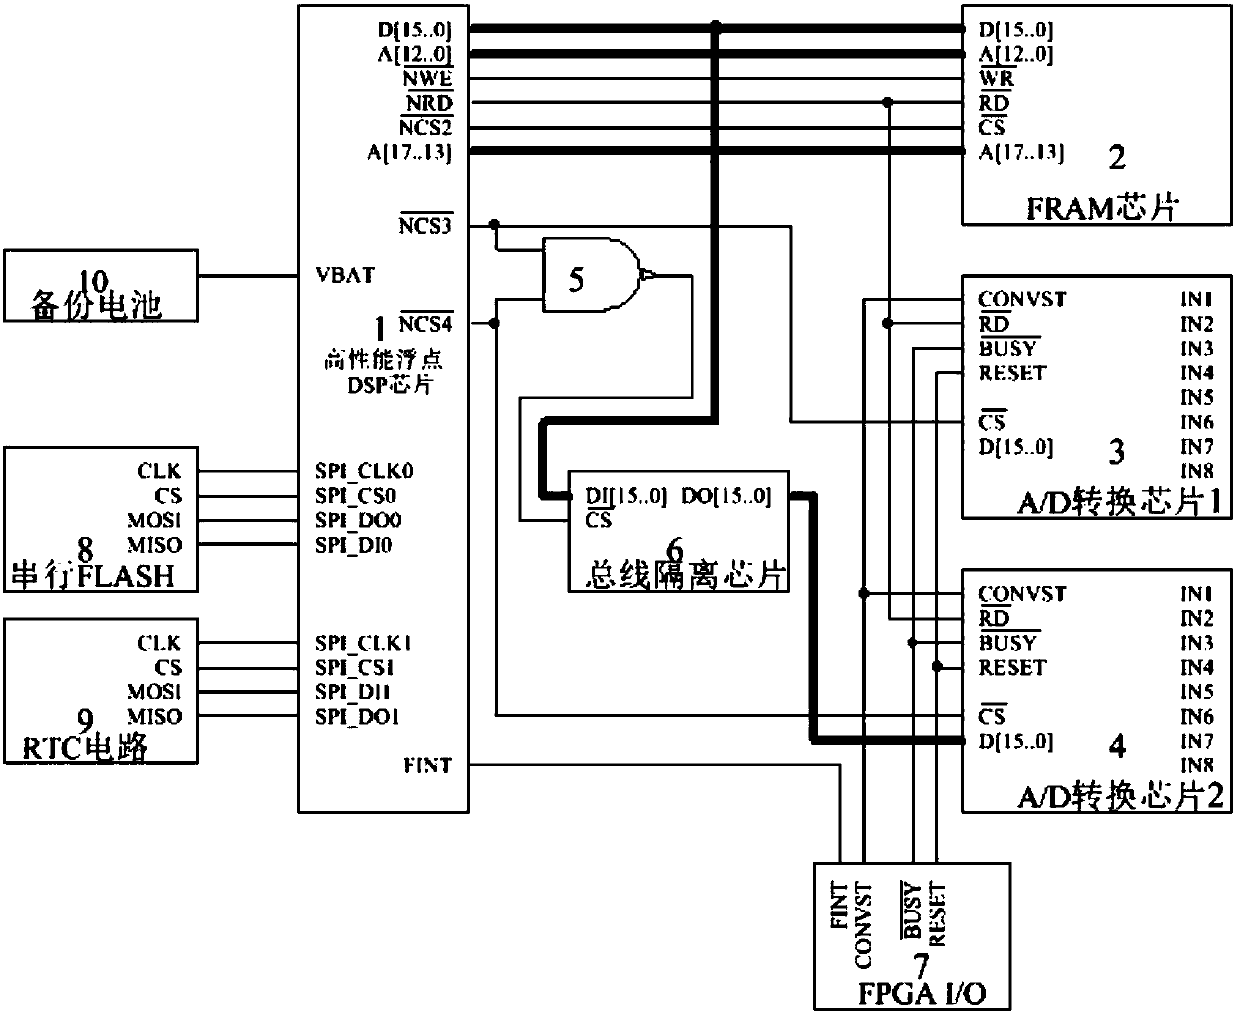 Cascade-type high voltage frequency converter master control system of multiprocessor architecture